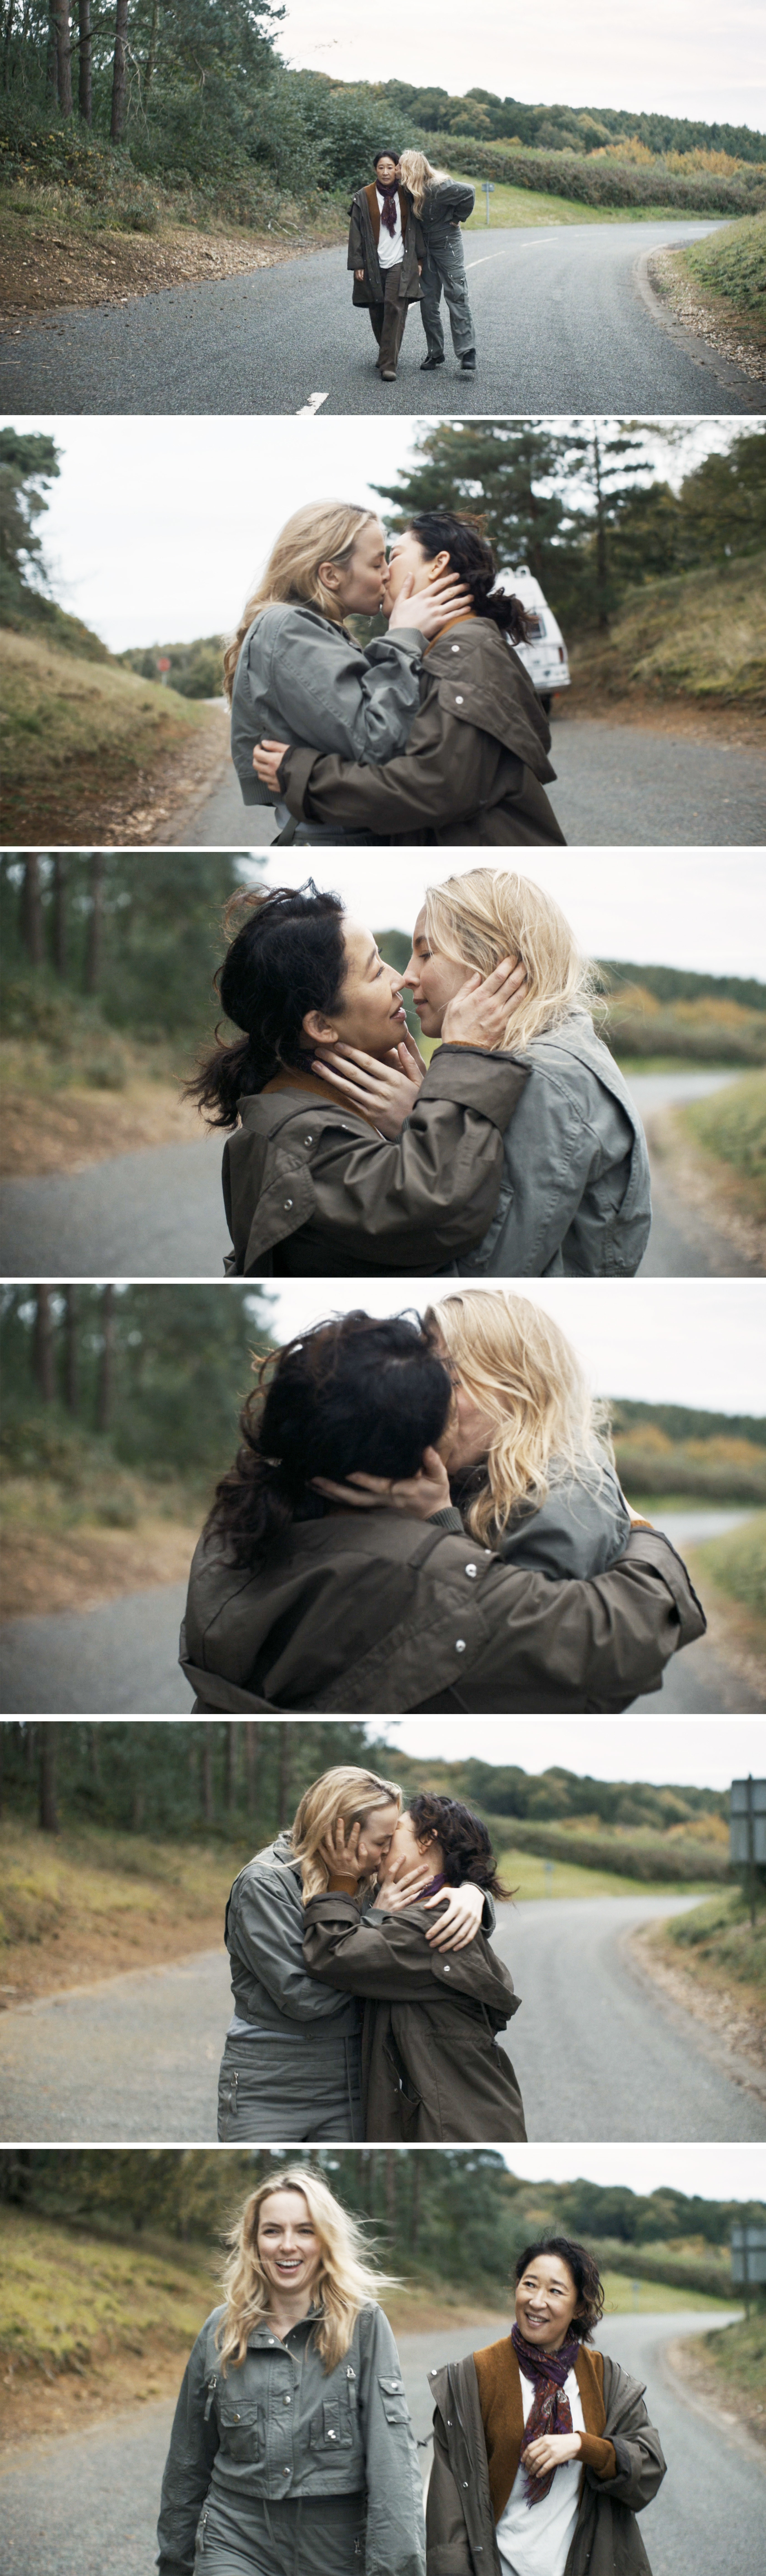 Villanelle and Eve smiling and laughing after they kiss while walking down a road